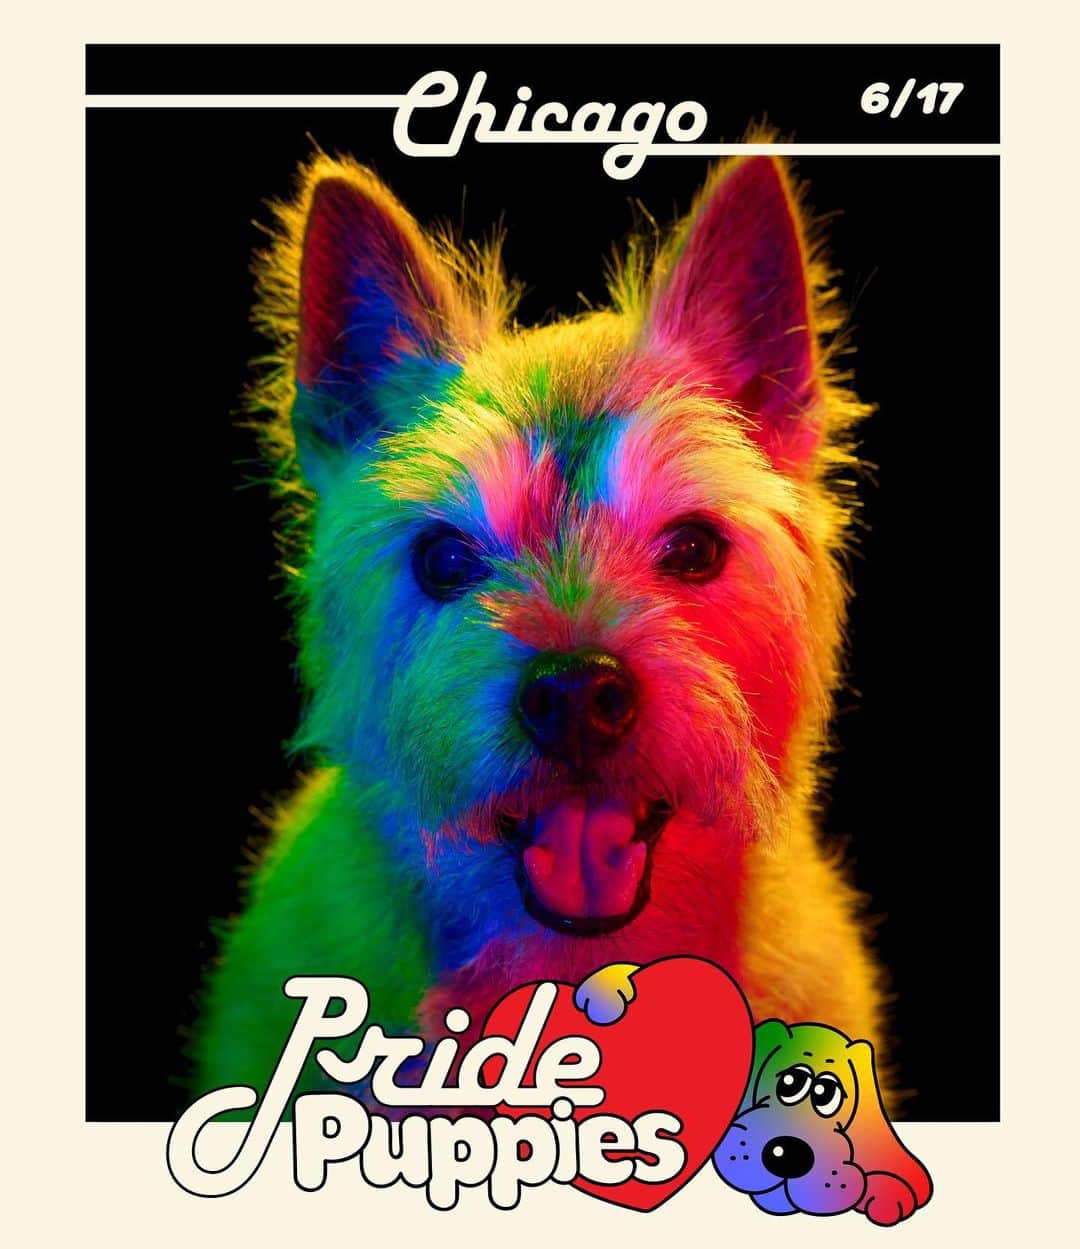 Paul Octaviousのインスタグラム：「🌈🐶 Let's yassify the Pup in your life! 🐾❤️  Calling all proud pet parents! 🌈🐾  Join me for an unforgettable Pride Puppy Rainbow Photoshoot in Chicago next weekend and let's unleash the fierce spirit of your beloved pup.  Do you have a fabulous, four-legged friend who is ready to sashay and slay? 🌈🐕 Whether they're a gay dog, a straight dog, or just a dog with a whole lot of attitude, all are welcome to join in on the fun! And guess what?  I have a limited number of studio slots available. With Each purchase you a private studio session and  a print of your rainbow pup 🐶🏳️‍🌈  But wait, if you like GAMES of CHANCE there's more! 🎉 I'm giving away a free session too! Just tag a friend in the comments below or share this post in your Instagram story for a chance to win. Double your chances by doing both!  You can keep it for yourself or give it to a fellow GAY 🏳️‍🌈✨ It's time to bring the fabulousness to the masses! 🎁💕  📸 link in bio to book a Puppy Rainbow Portrait   🐶 ❤️ Pup picture above is Fritz @missrenaissance   #YassifyYourPup #PridePuppiesChicago #UnleashTheFabulous #SlayAndWag」